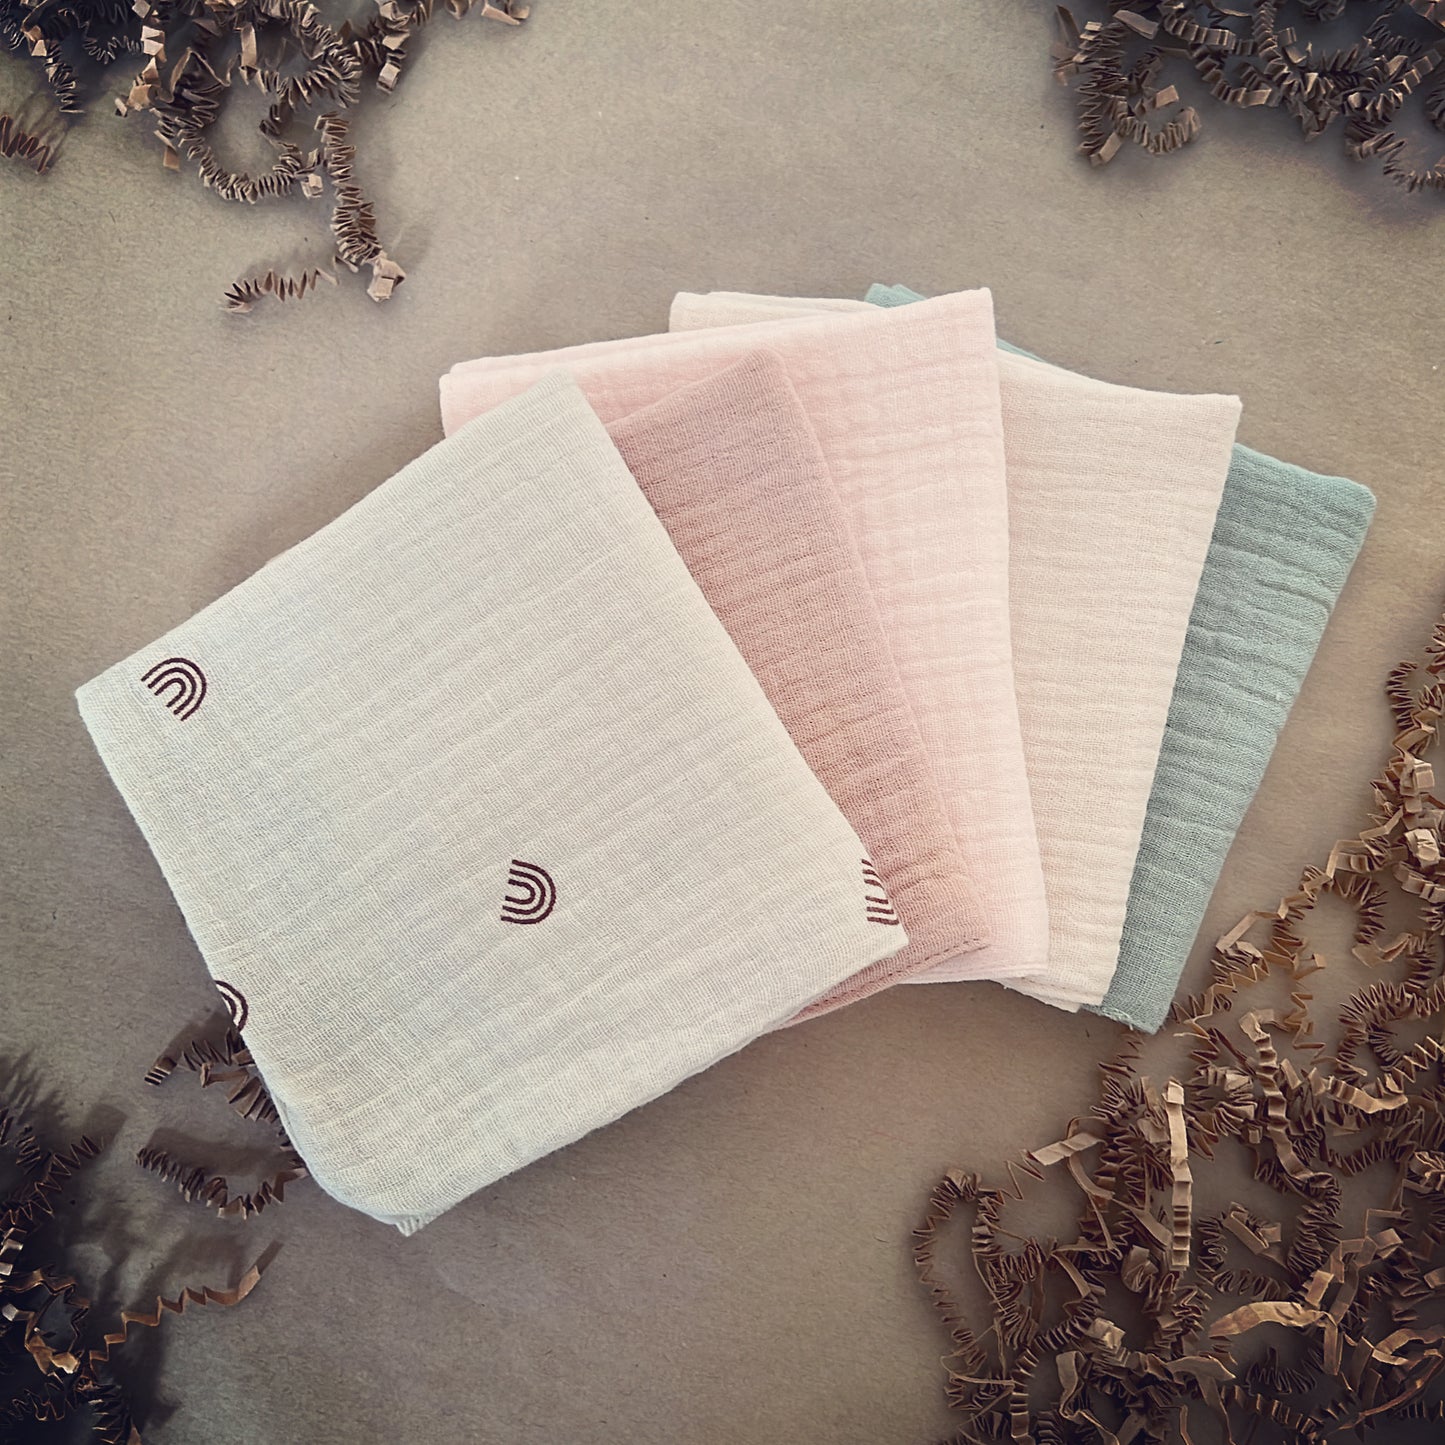 Set of 5 Soft and Absorbent Cotton Burp Cloths - Perfect Addition to Your Baby Gift Bundle